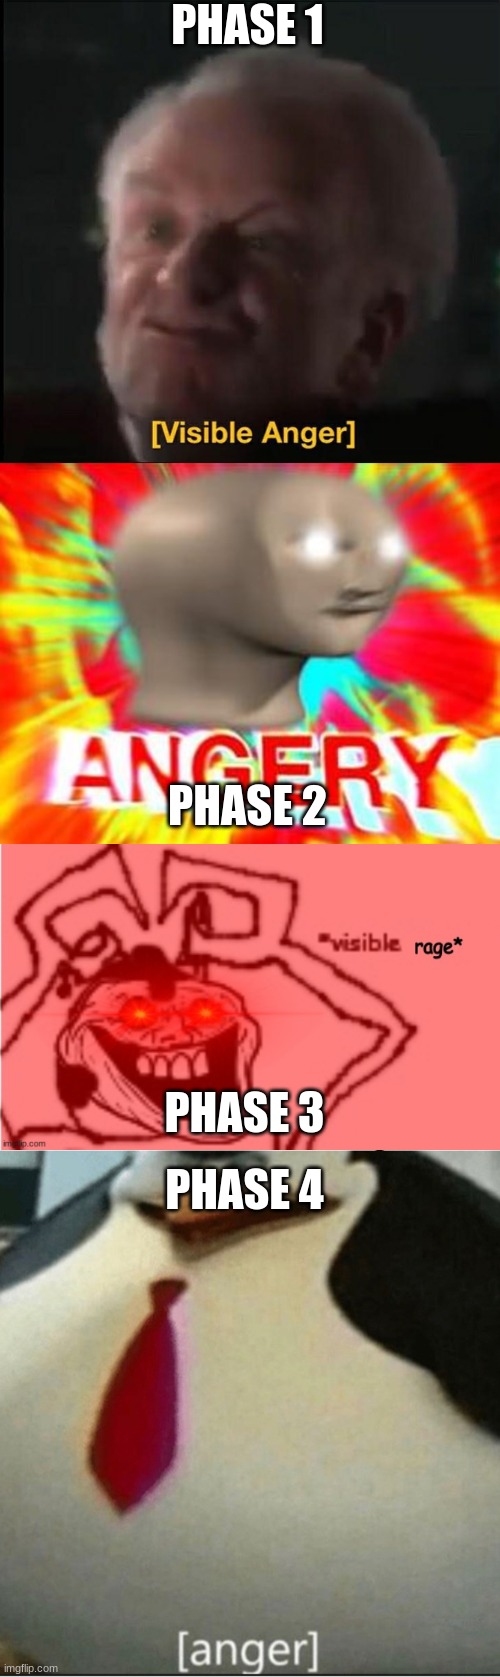 PHASE 1 PHASE 2 PHASE 3 PHASE 4 | image tagged in visible anger,surreal angery,trollge carlos visible rage,anger | made w/ Imgflip meme maker